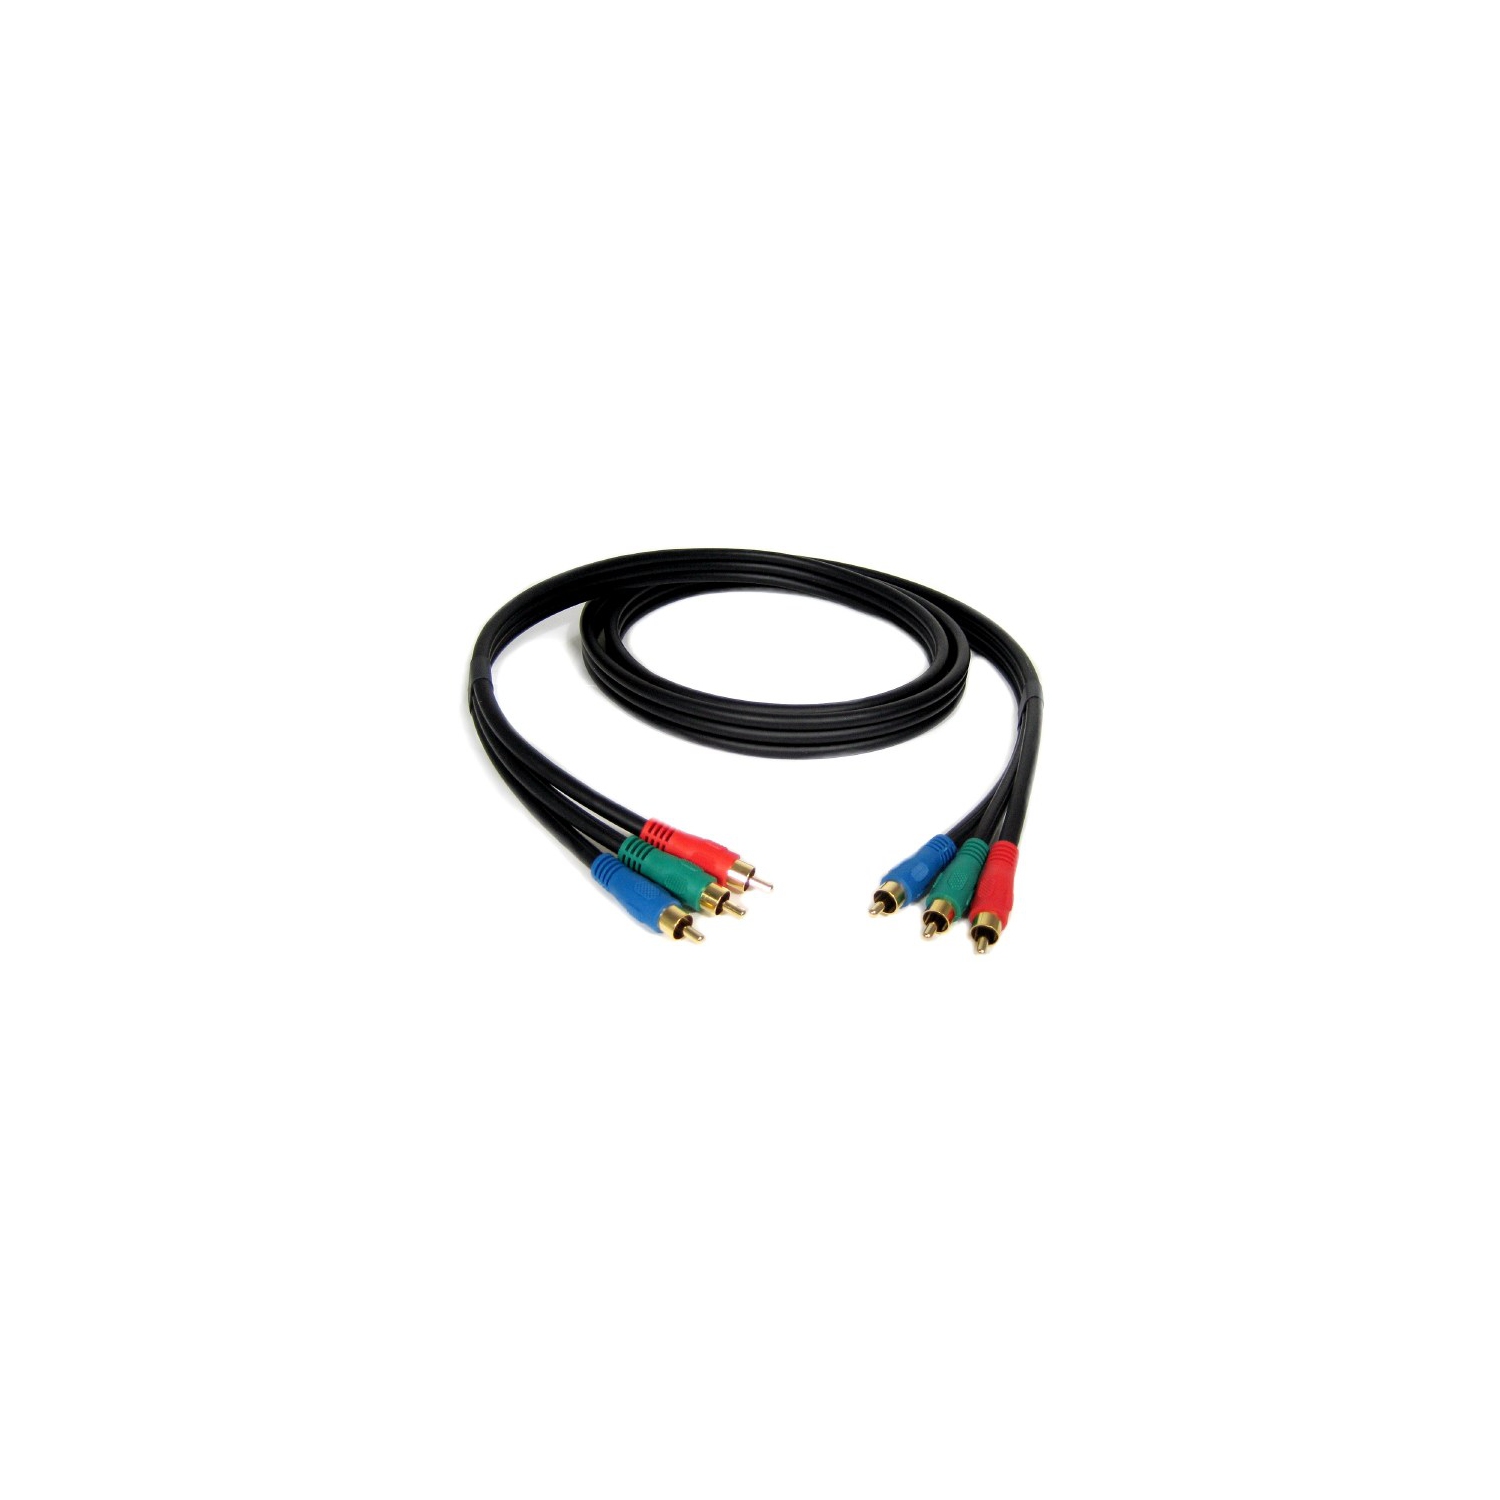 40 ft. Component RCA Video Cable (Red/Green/Blue) - TechCraft